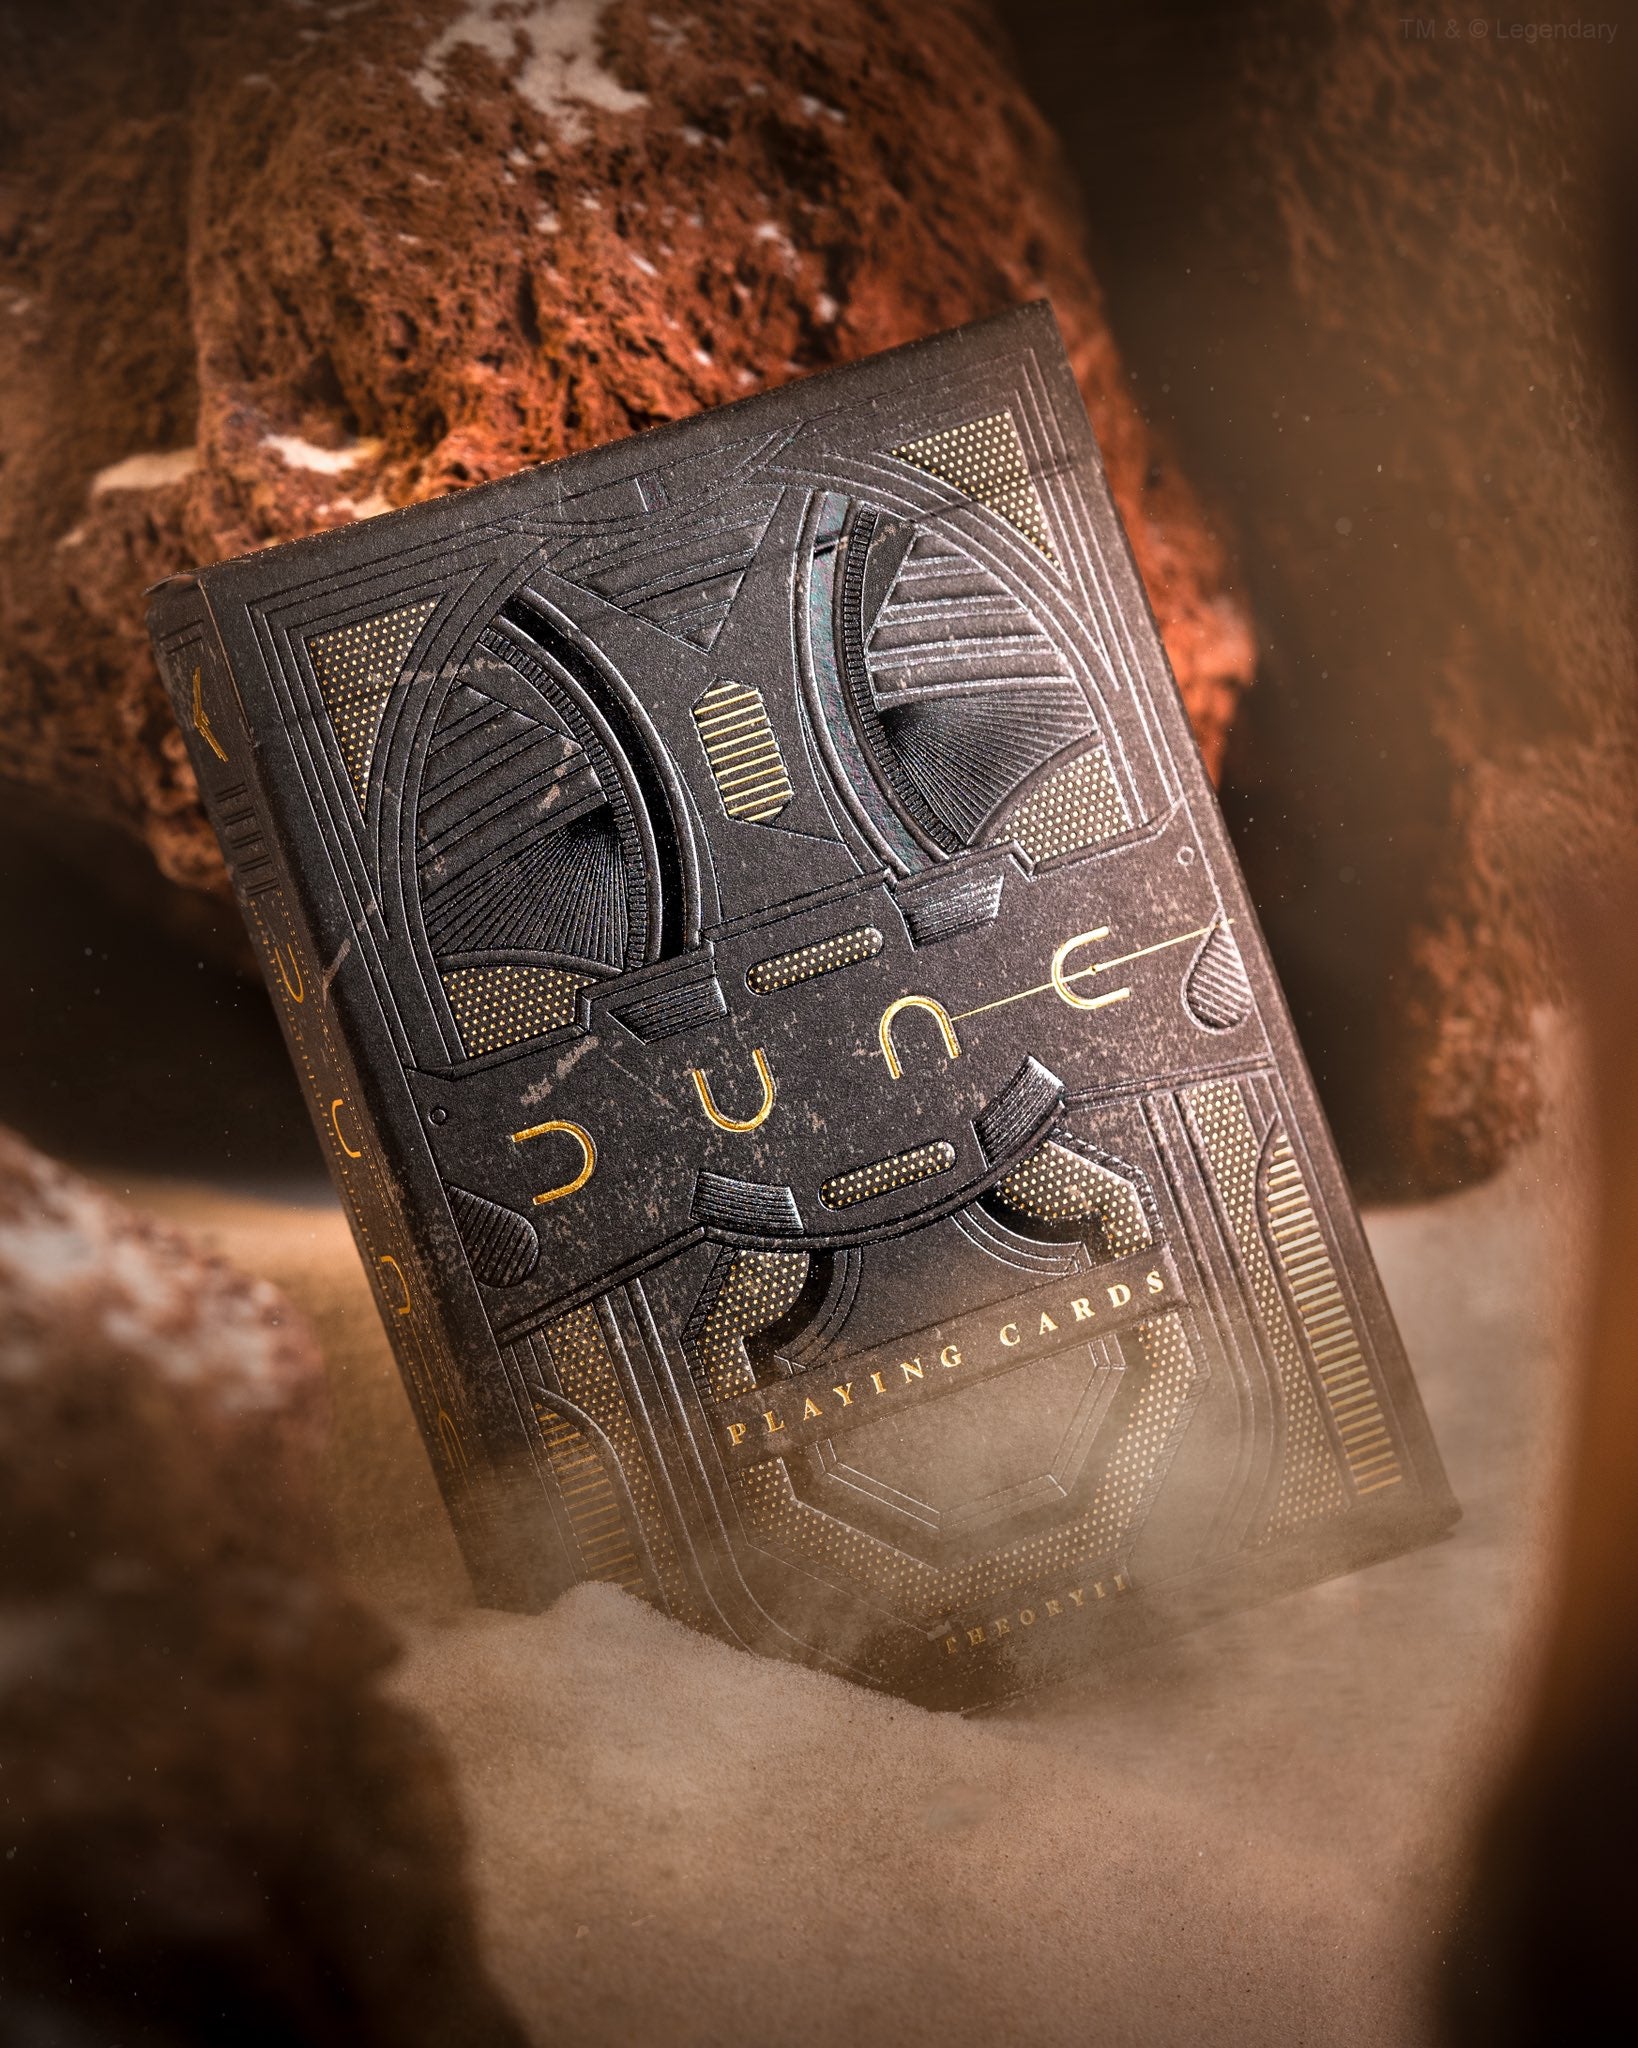 Theory11 Playing Cards: Dune